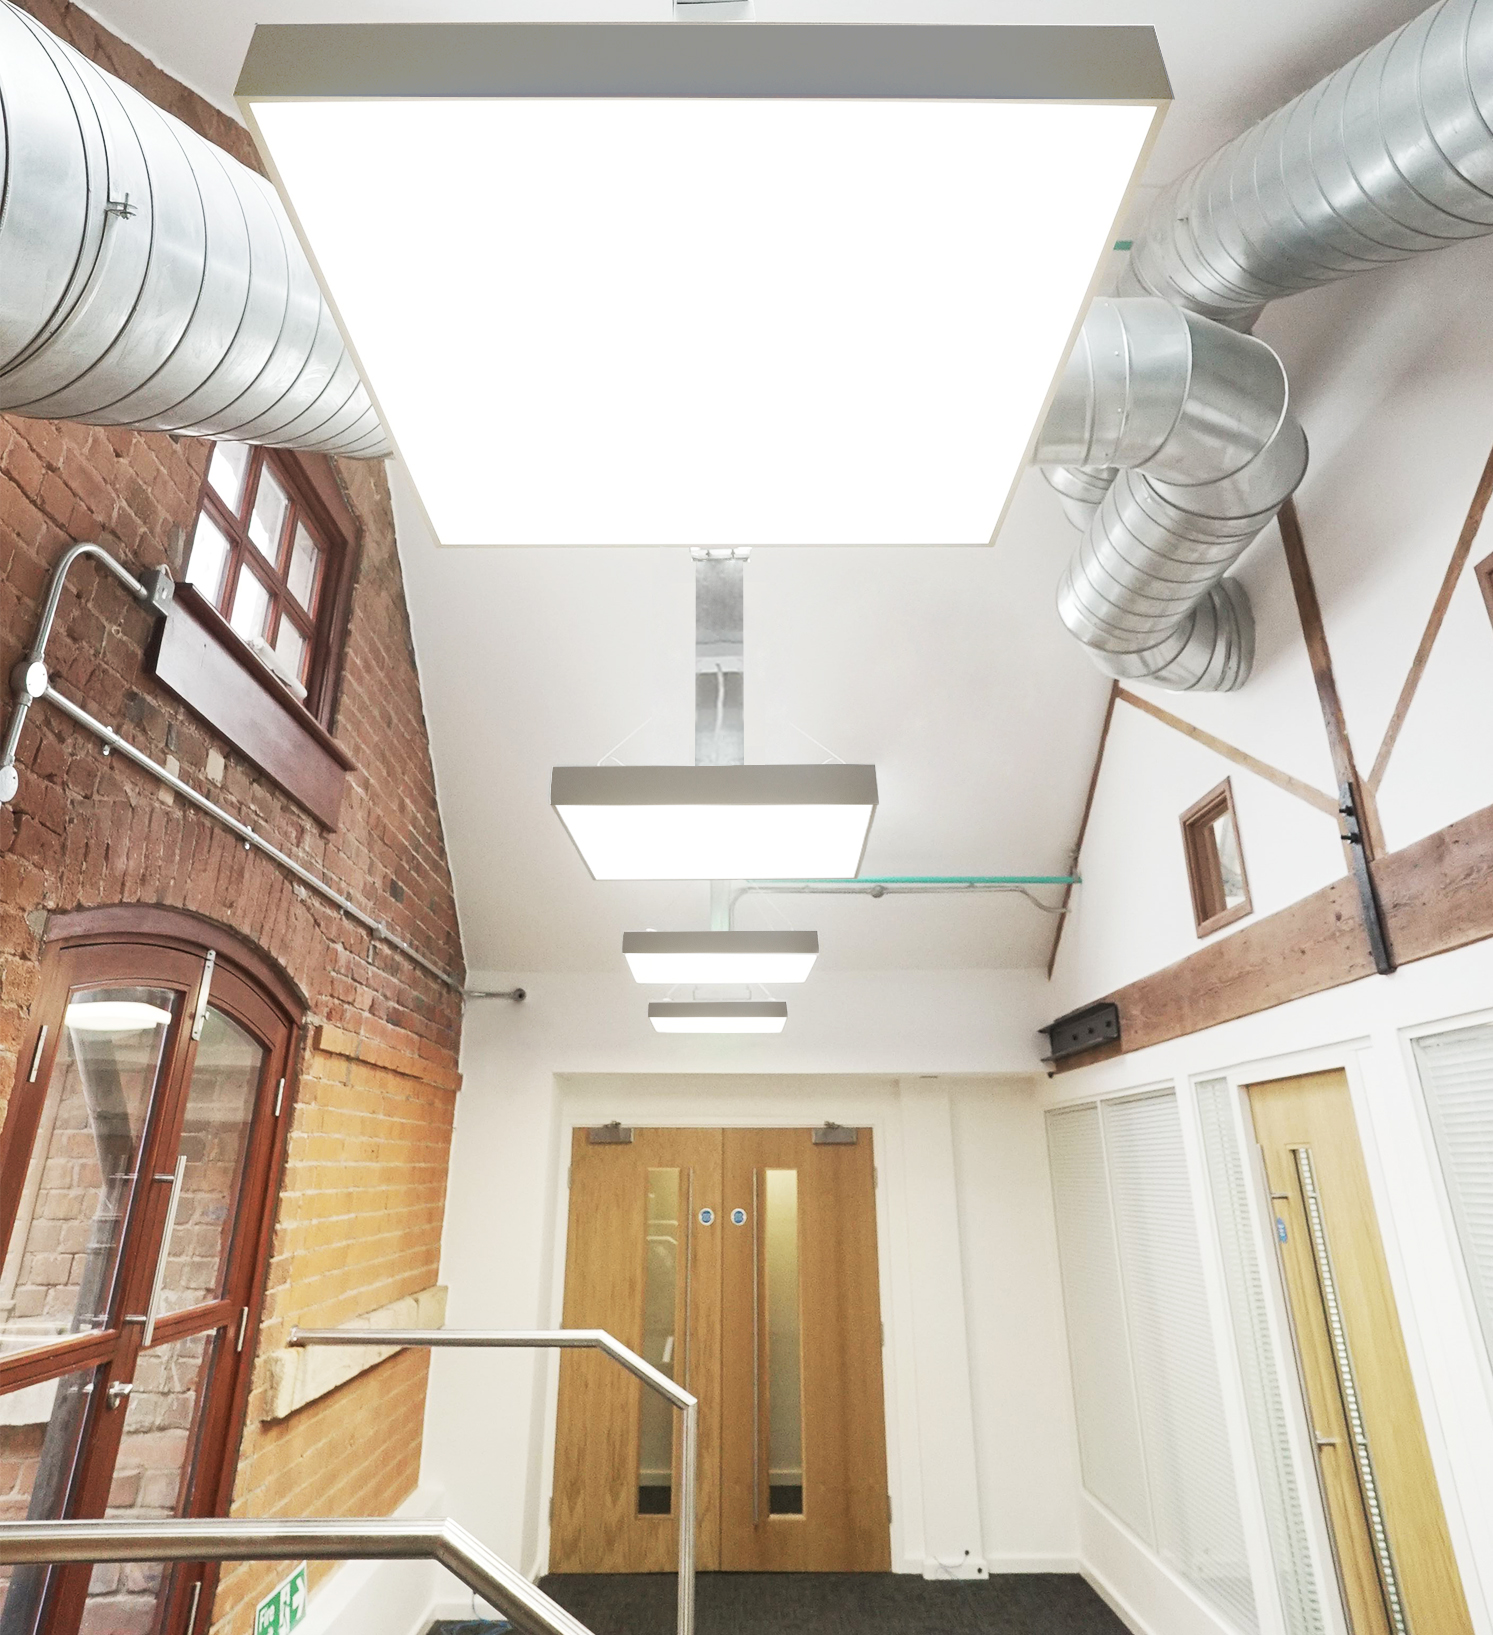 Lighting for a listed commercial building at The Maltings, Cardiff.